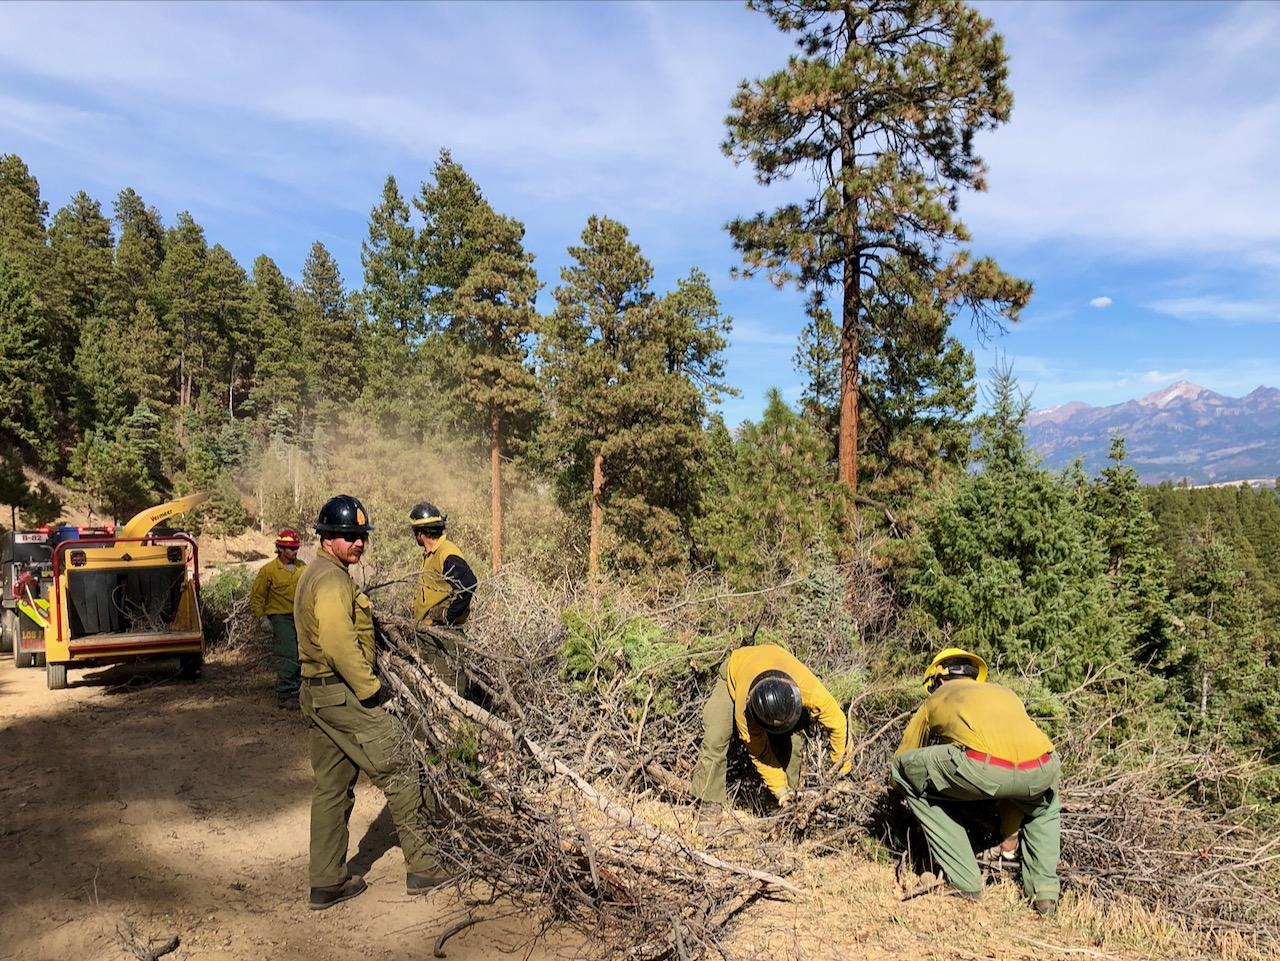 A crew of firefighters wearing yellow shirts and green pants with hard hats on feed brush into a wood chipper with a view of the San Juan Moutains in the background.